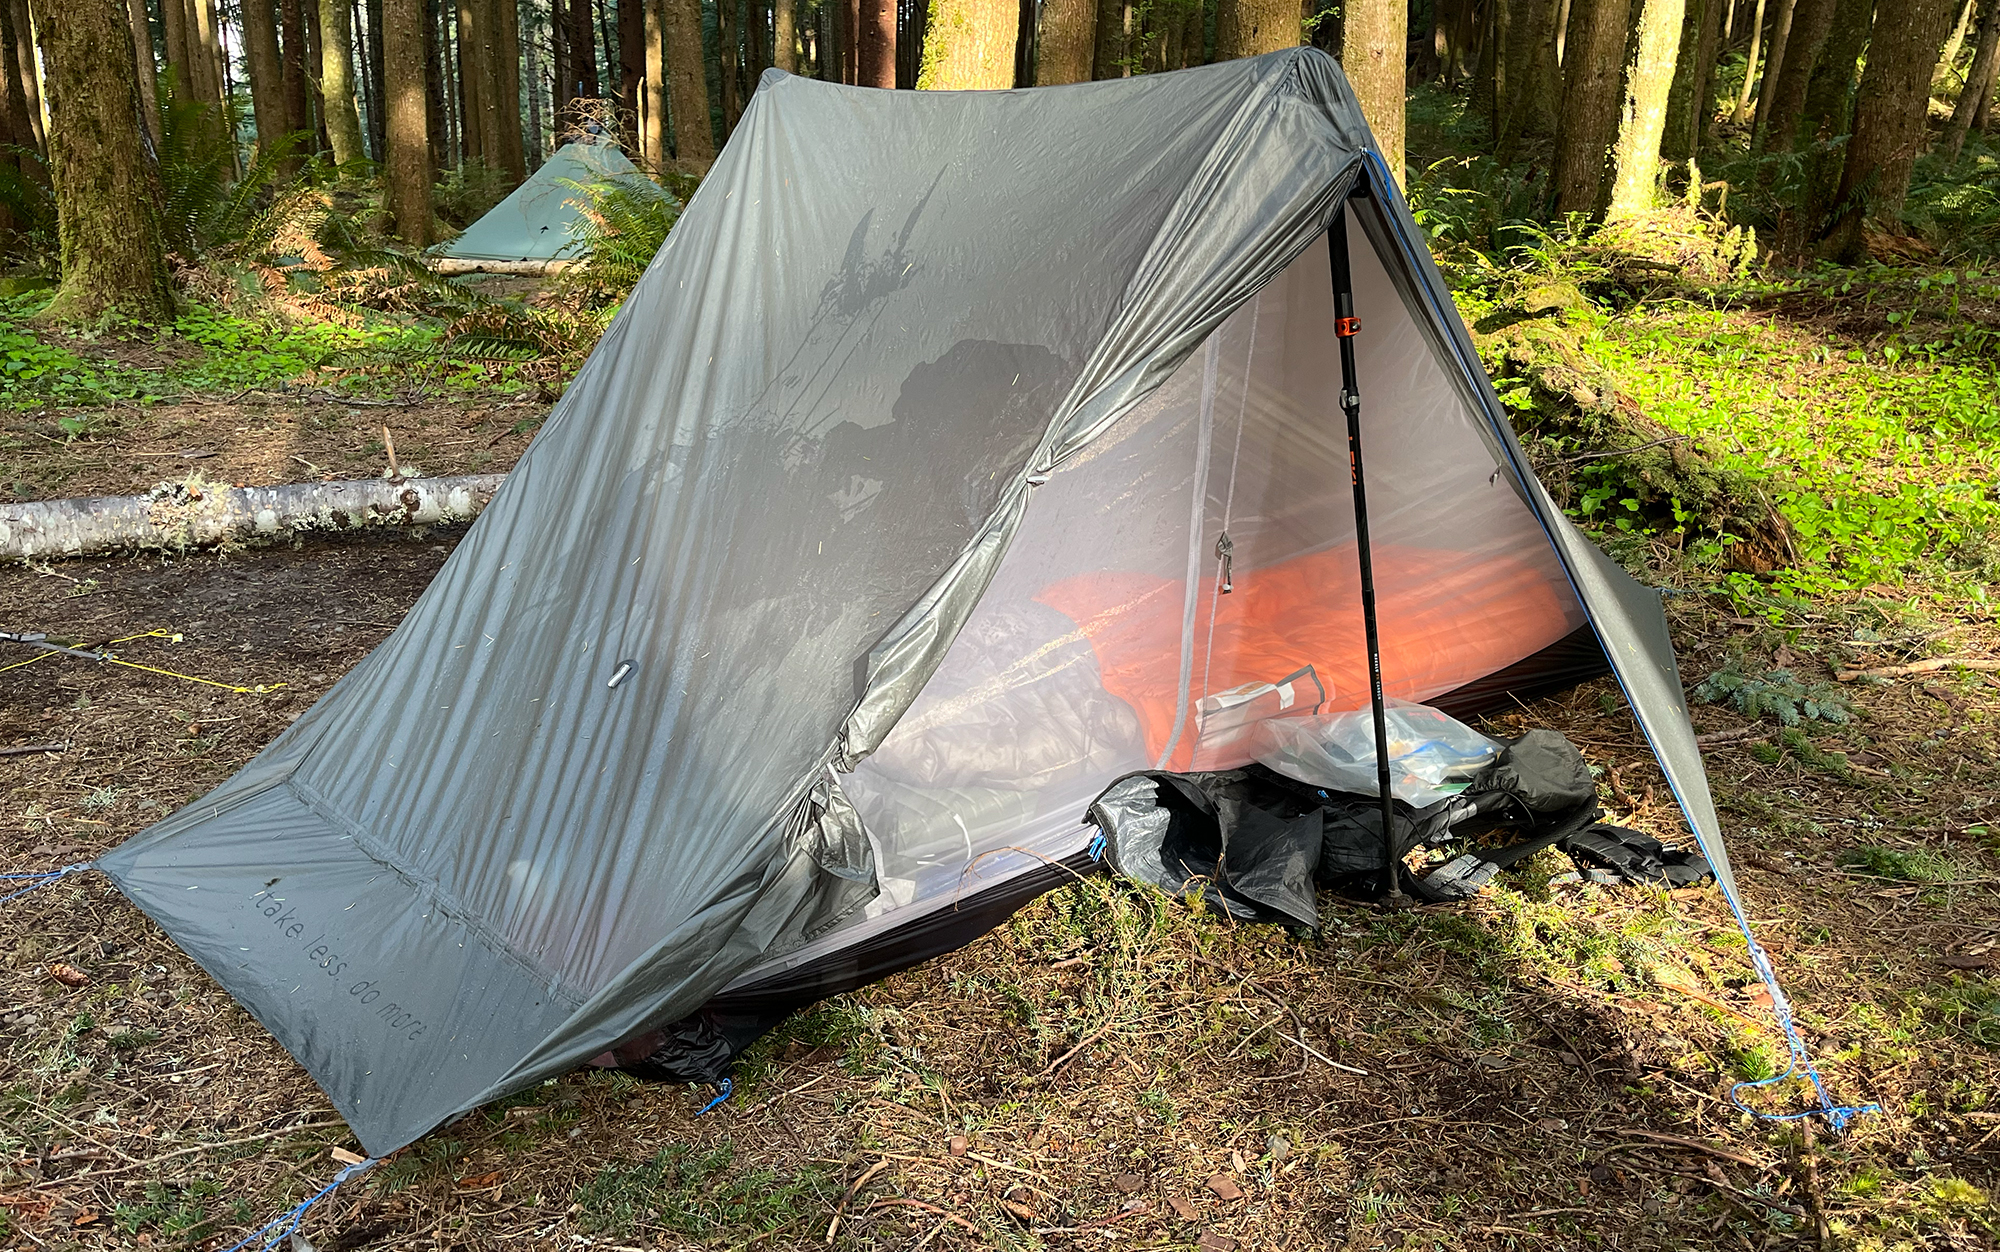 The Leki Makalu FX Carbons were ideal for holding up the best overall ultralight tent, Gossamer Gear’s The One, in heavy coastal condensation. These trekking poles paired with this tent are a $540, sub-3-pound dream team on trail.